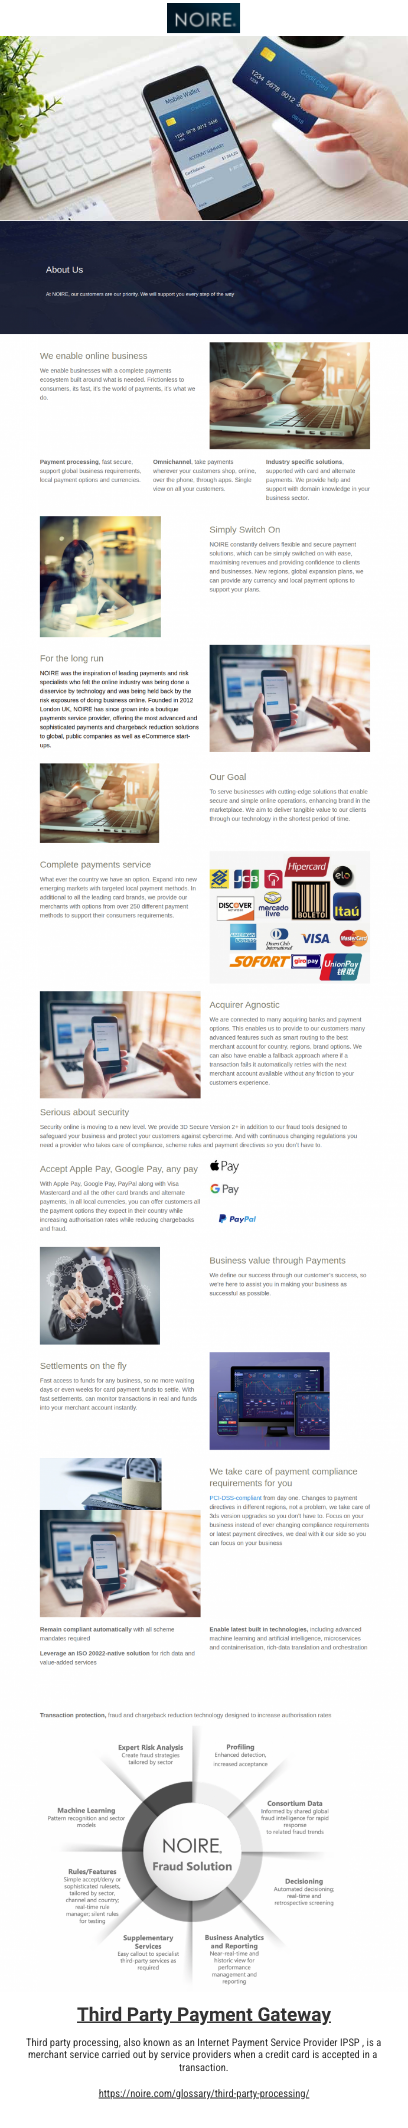 Third Party Payment Gateway - by noire pay [Infographic]